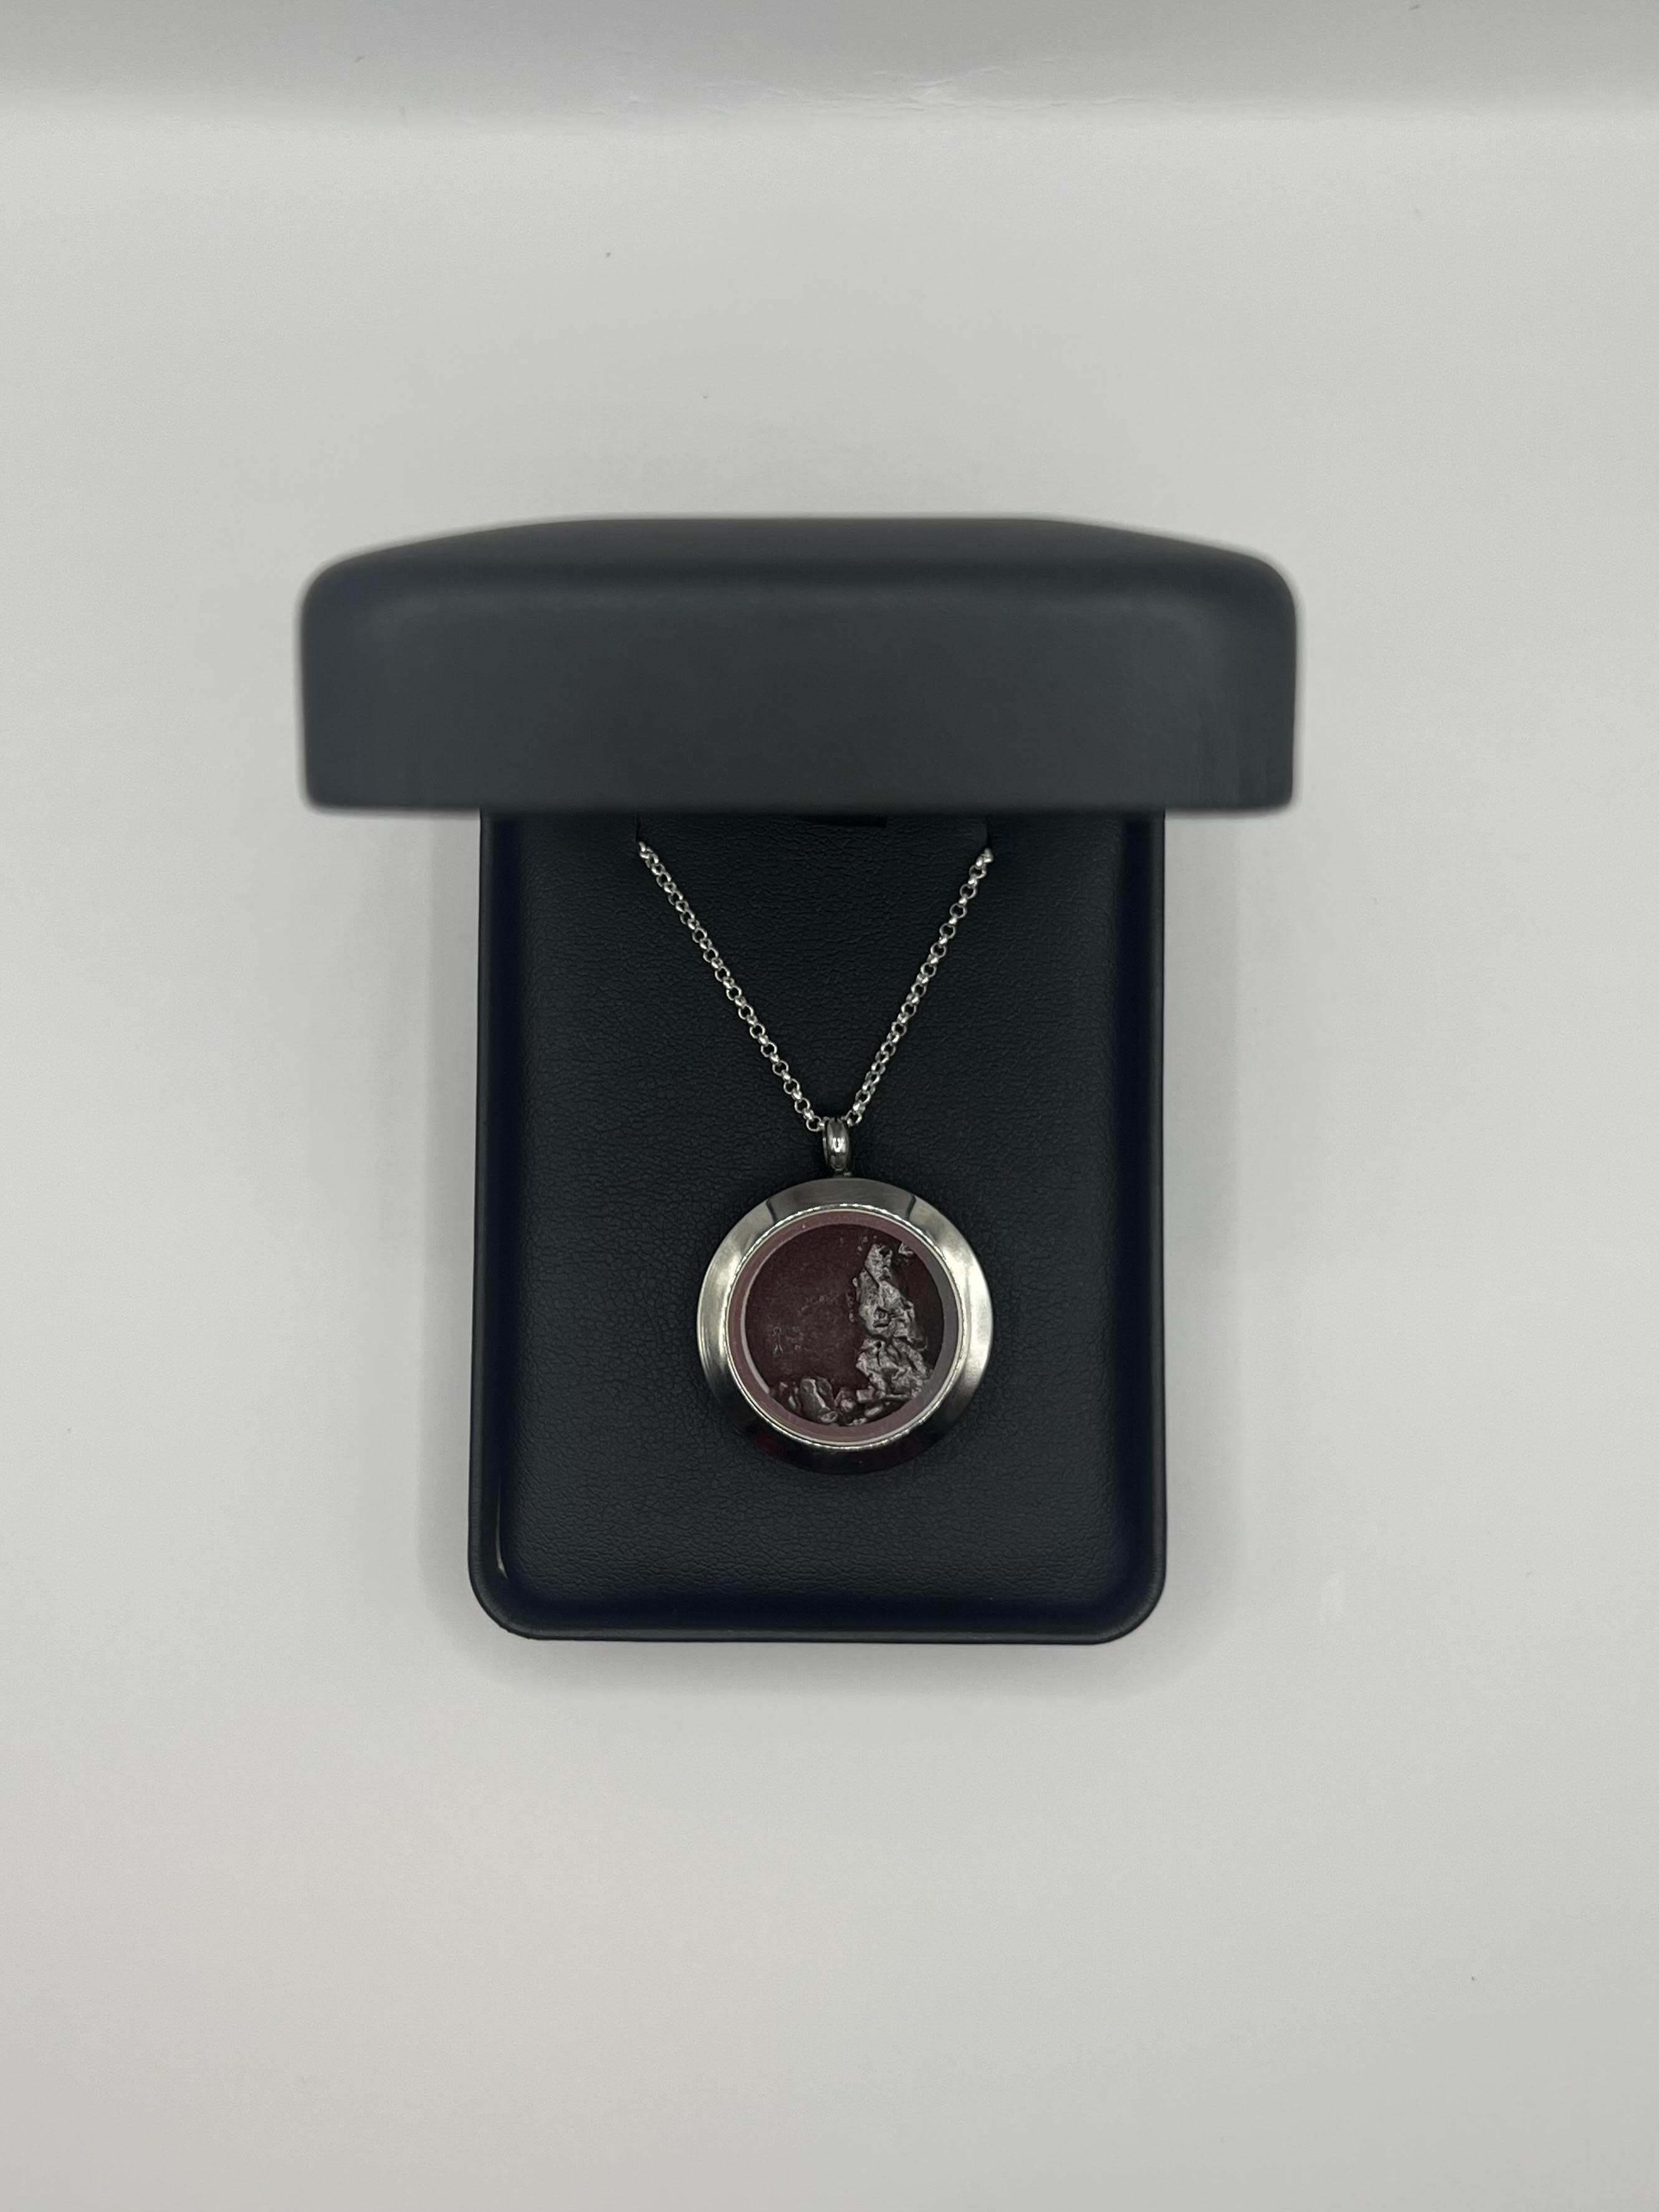 Magnetic Locket Necklace with Meteorite Campo del Cielo Sterling Pendant - The Space Store